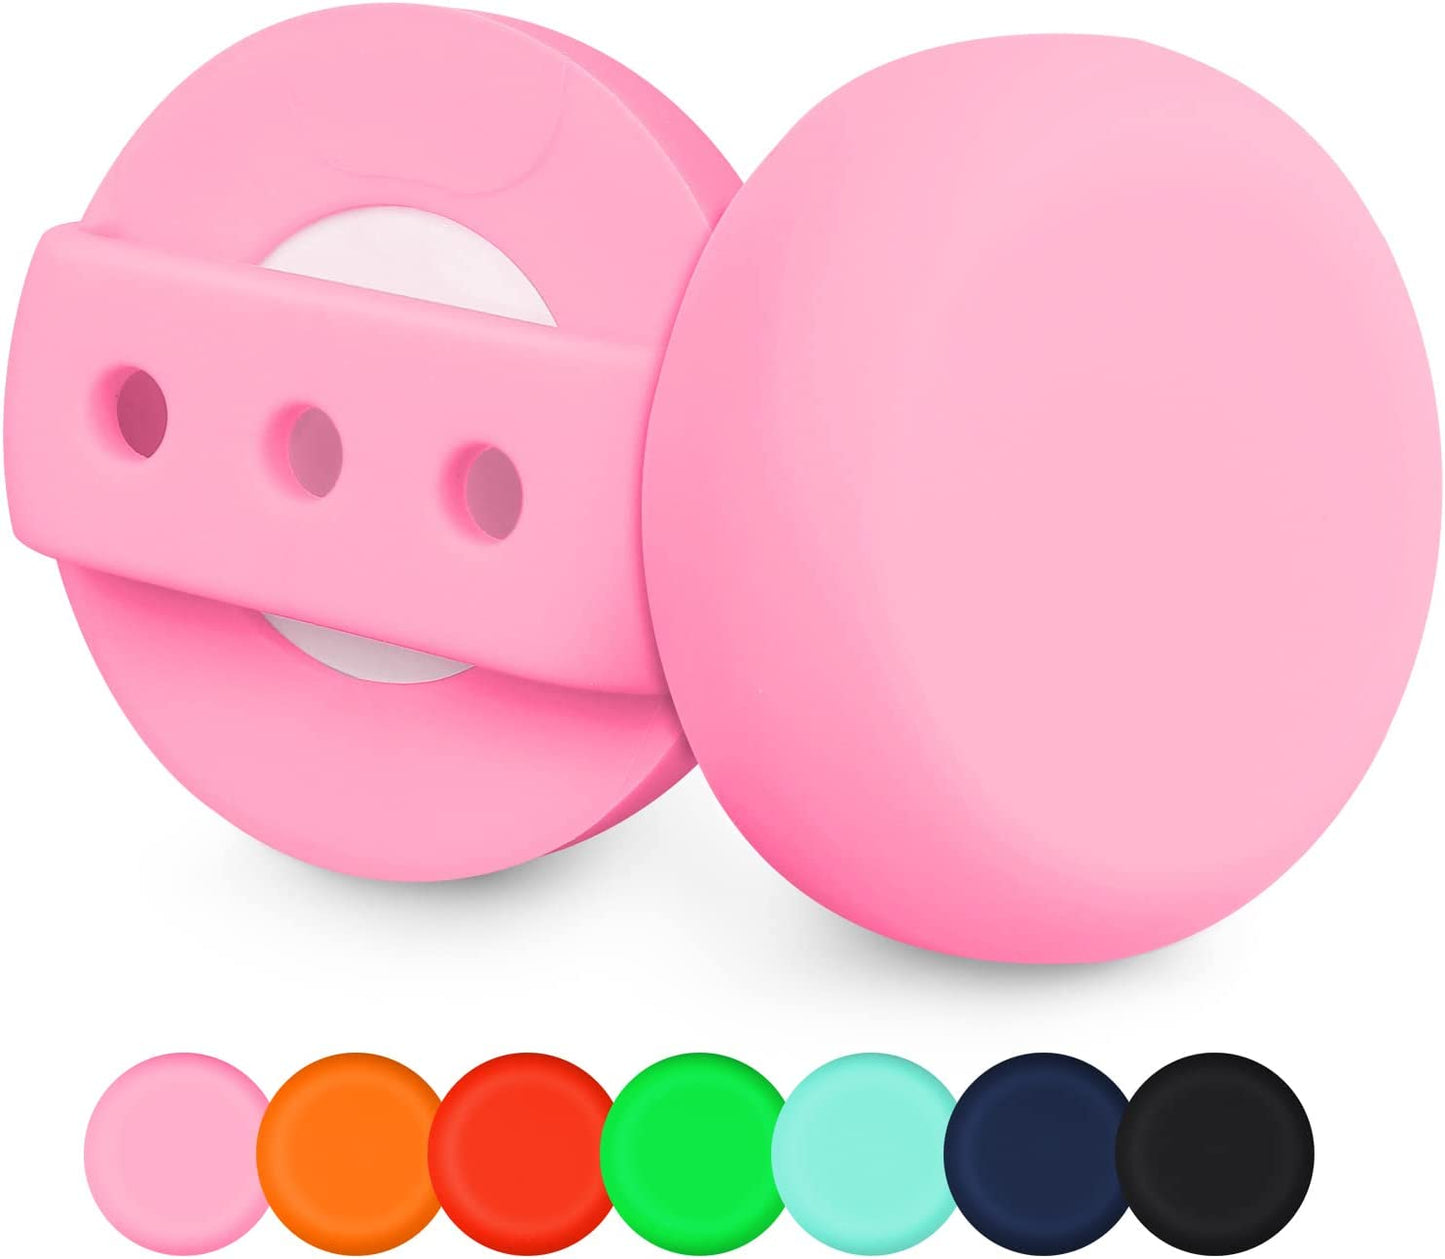 MOOGROU Airtag Dog Collar Holder 2 Pack,Newest Premium Protective Case for Apple Air Tag Tracker,Lightweight Silicone Airtag Case for Cat Collar Pet Loops,Waterproof Airtag.Dog Collar Holder Pink S Electronics > GPS Accessories > GPS Cases MOOGROU Pink+Pink L-3/4" 1" 